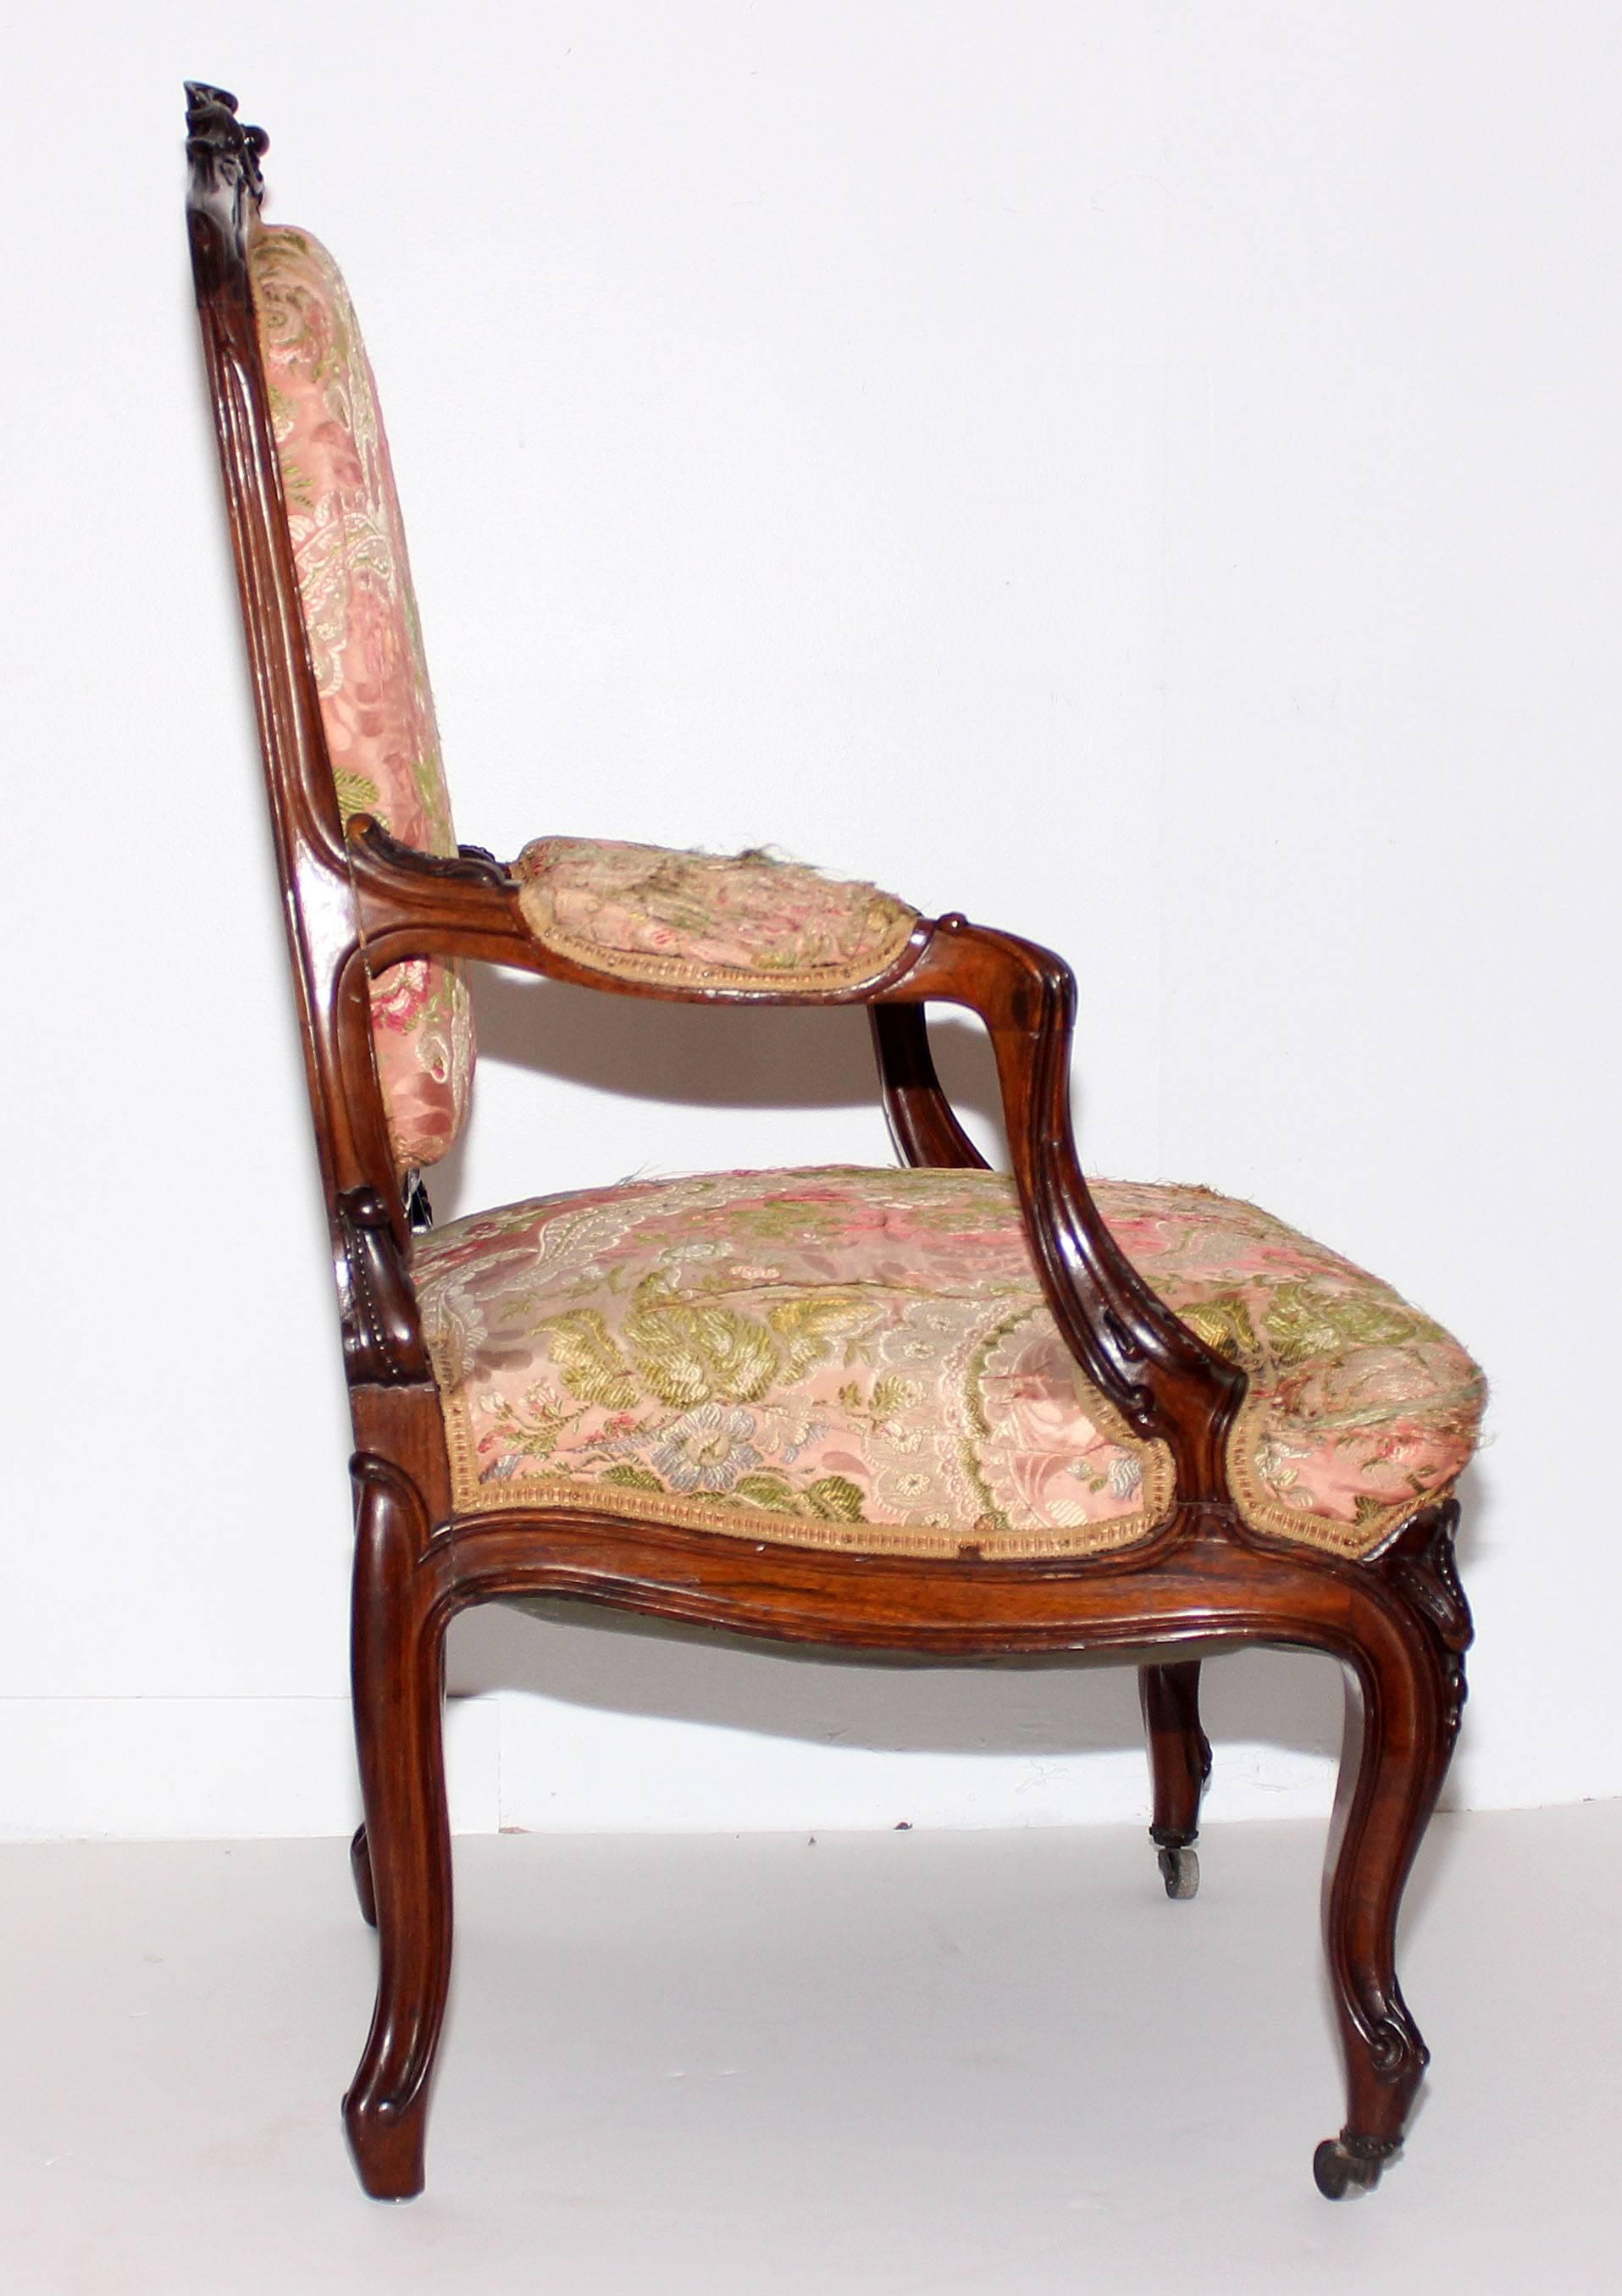 French 19th century rosewood Louis XV style fauteuil. Finely carved with very good finish. Needs upholstery and joints need to be tightened.